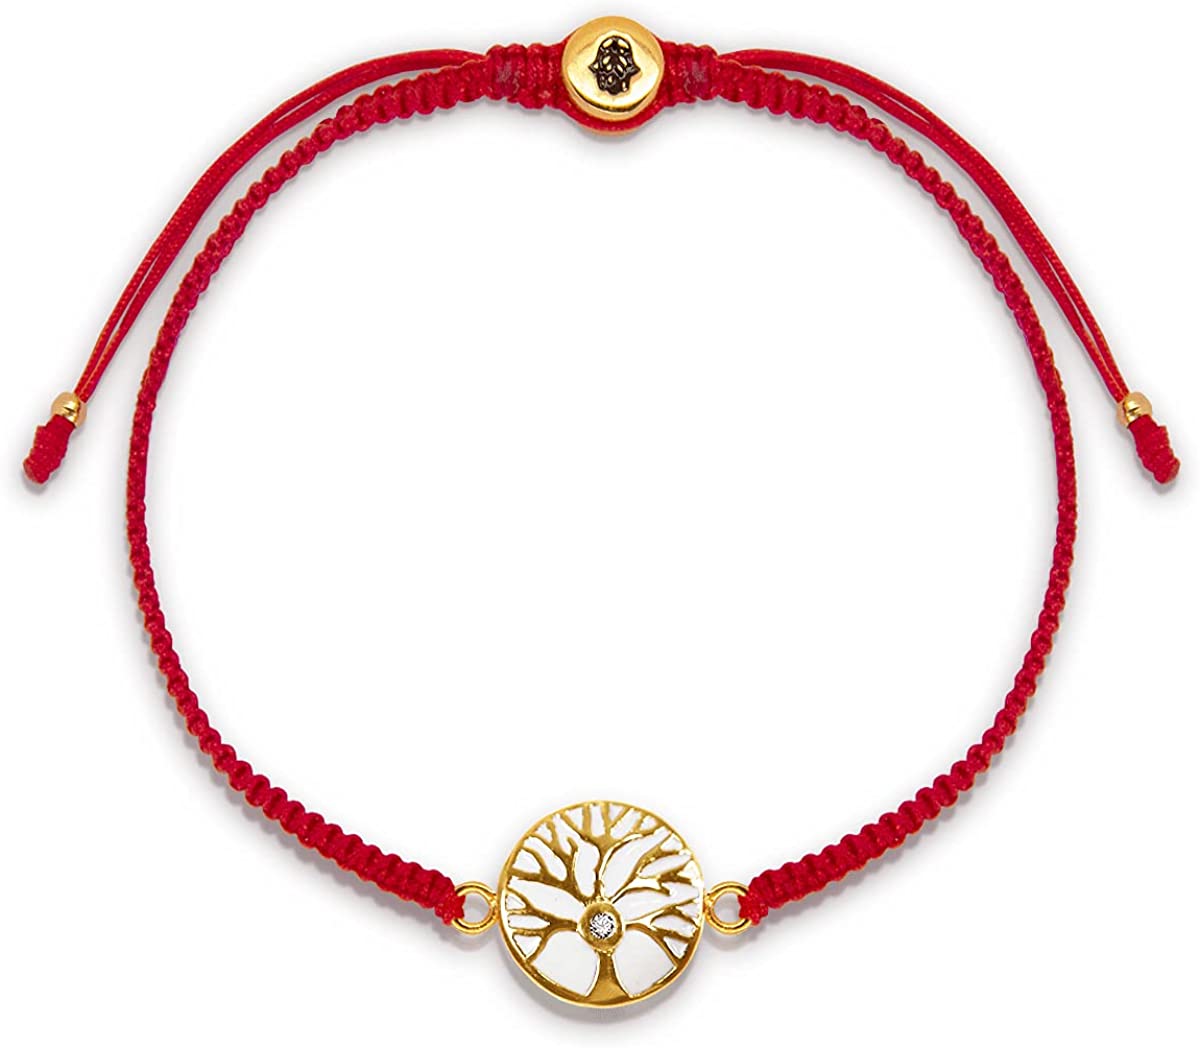 Karma and Luck - Branching Destiny - Women's 18K Gold Plated Brass Tree of Life Charm Red String Adjustable Bracelet Handmade with Love in Bali to Bring You Positive Energy